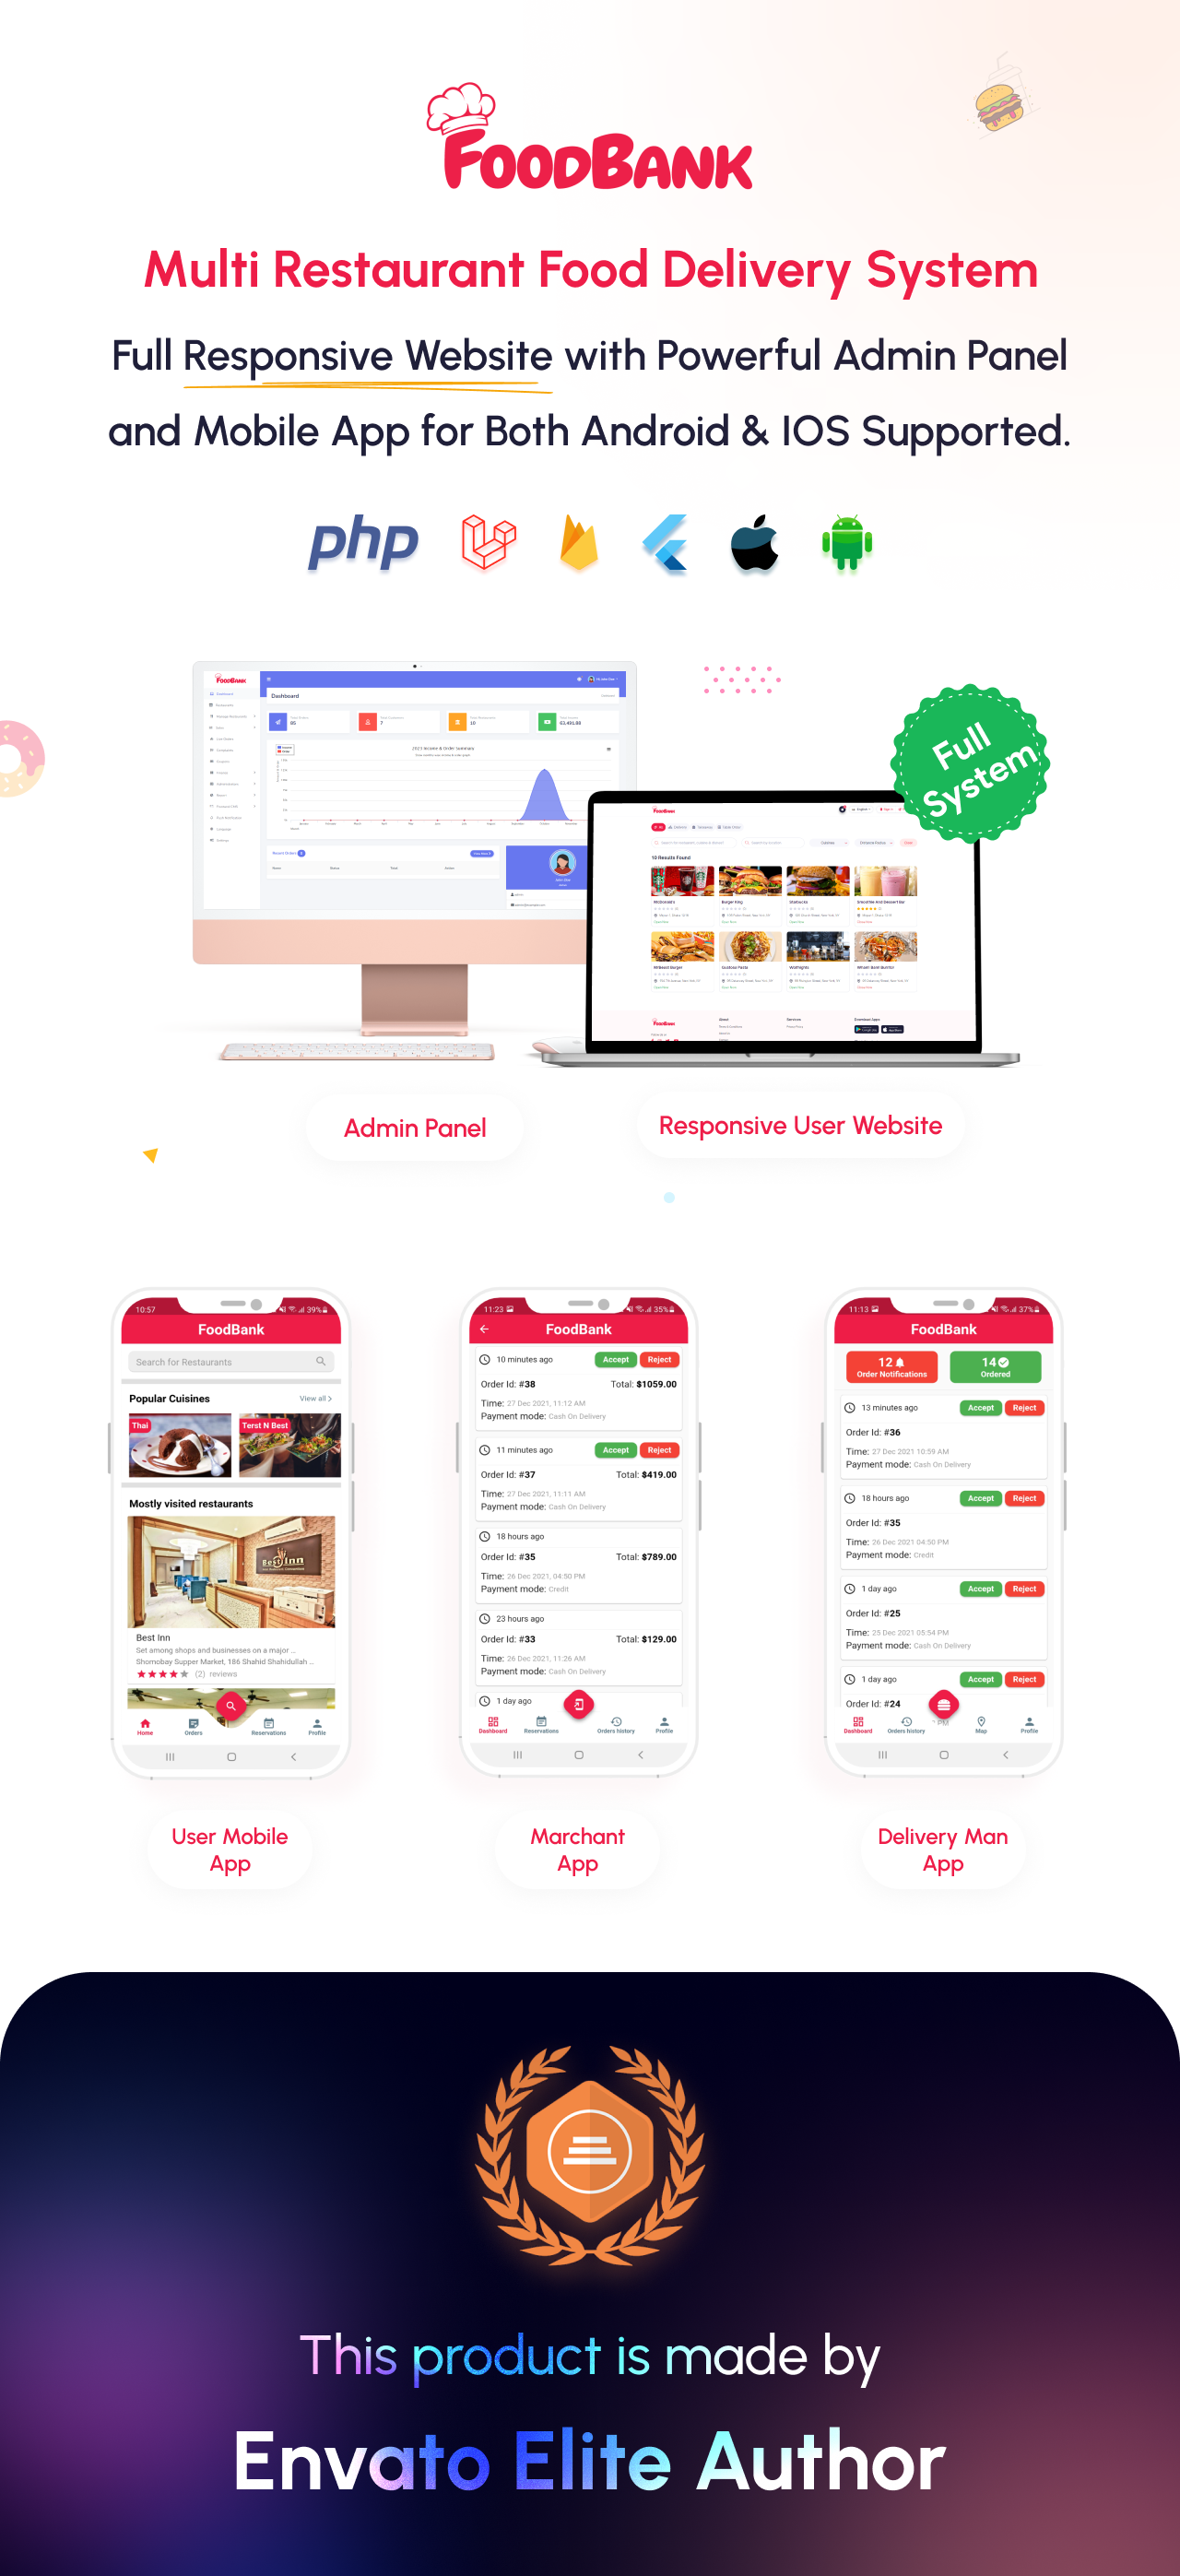 FoodBank - All In One Multi Restaurant Food Ordering System & Delivery System With Management System